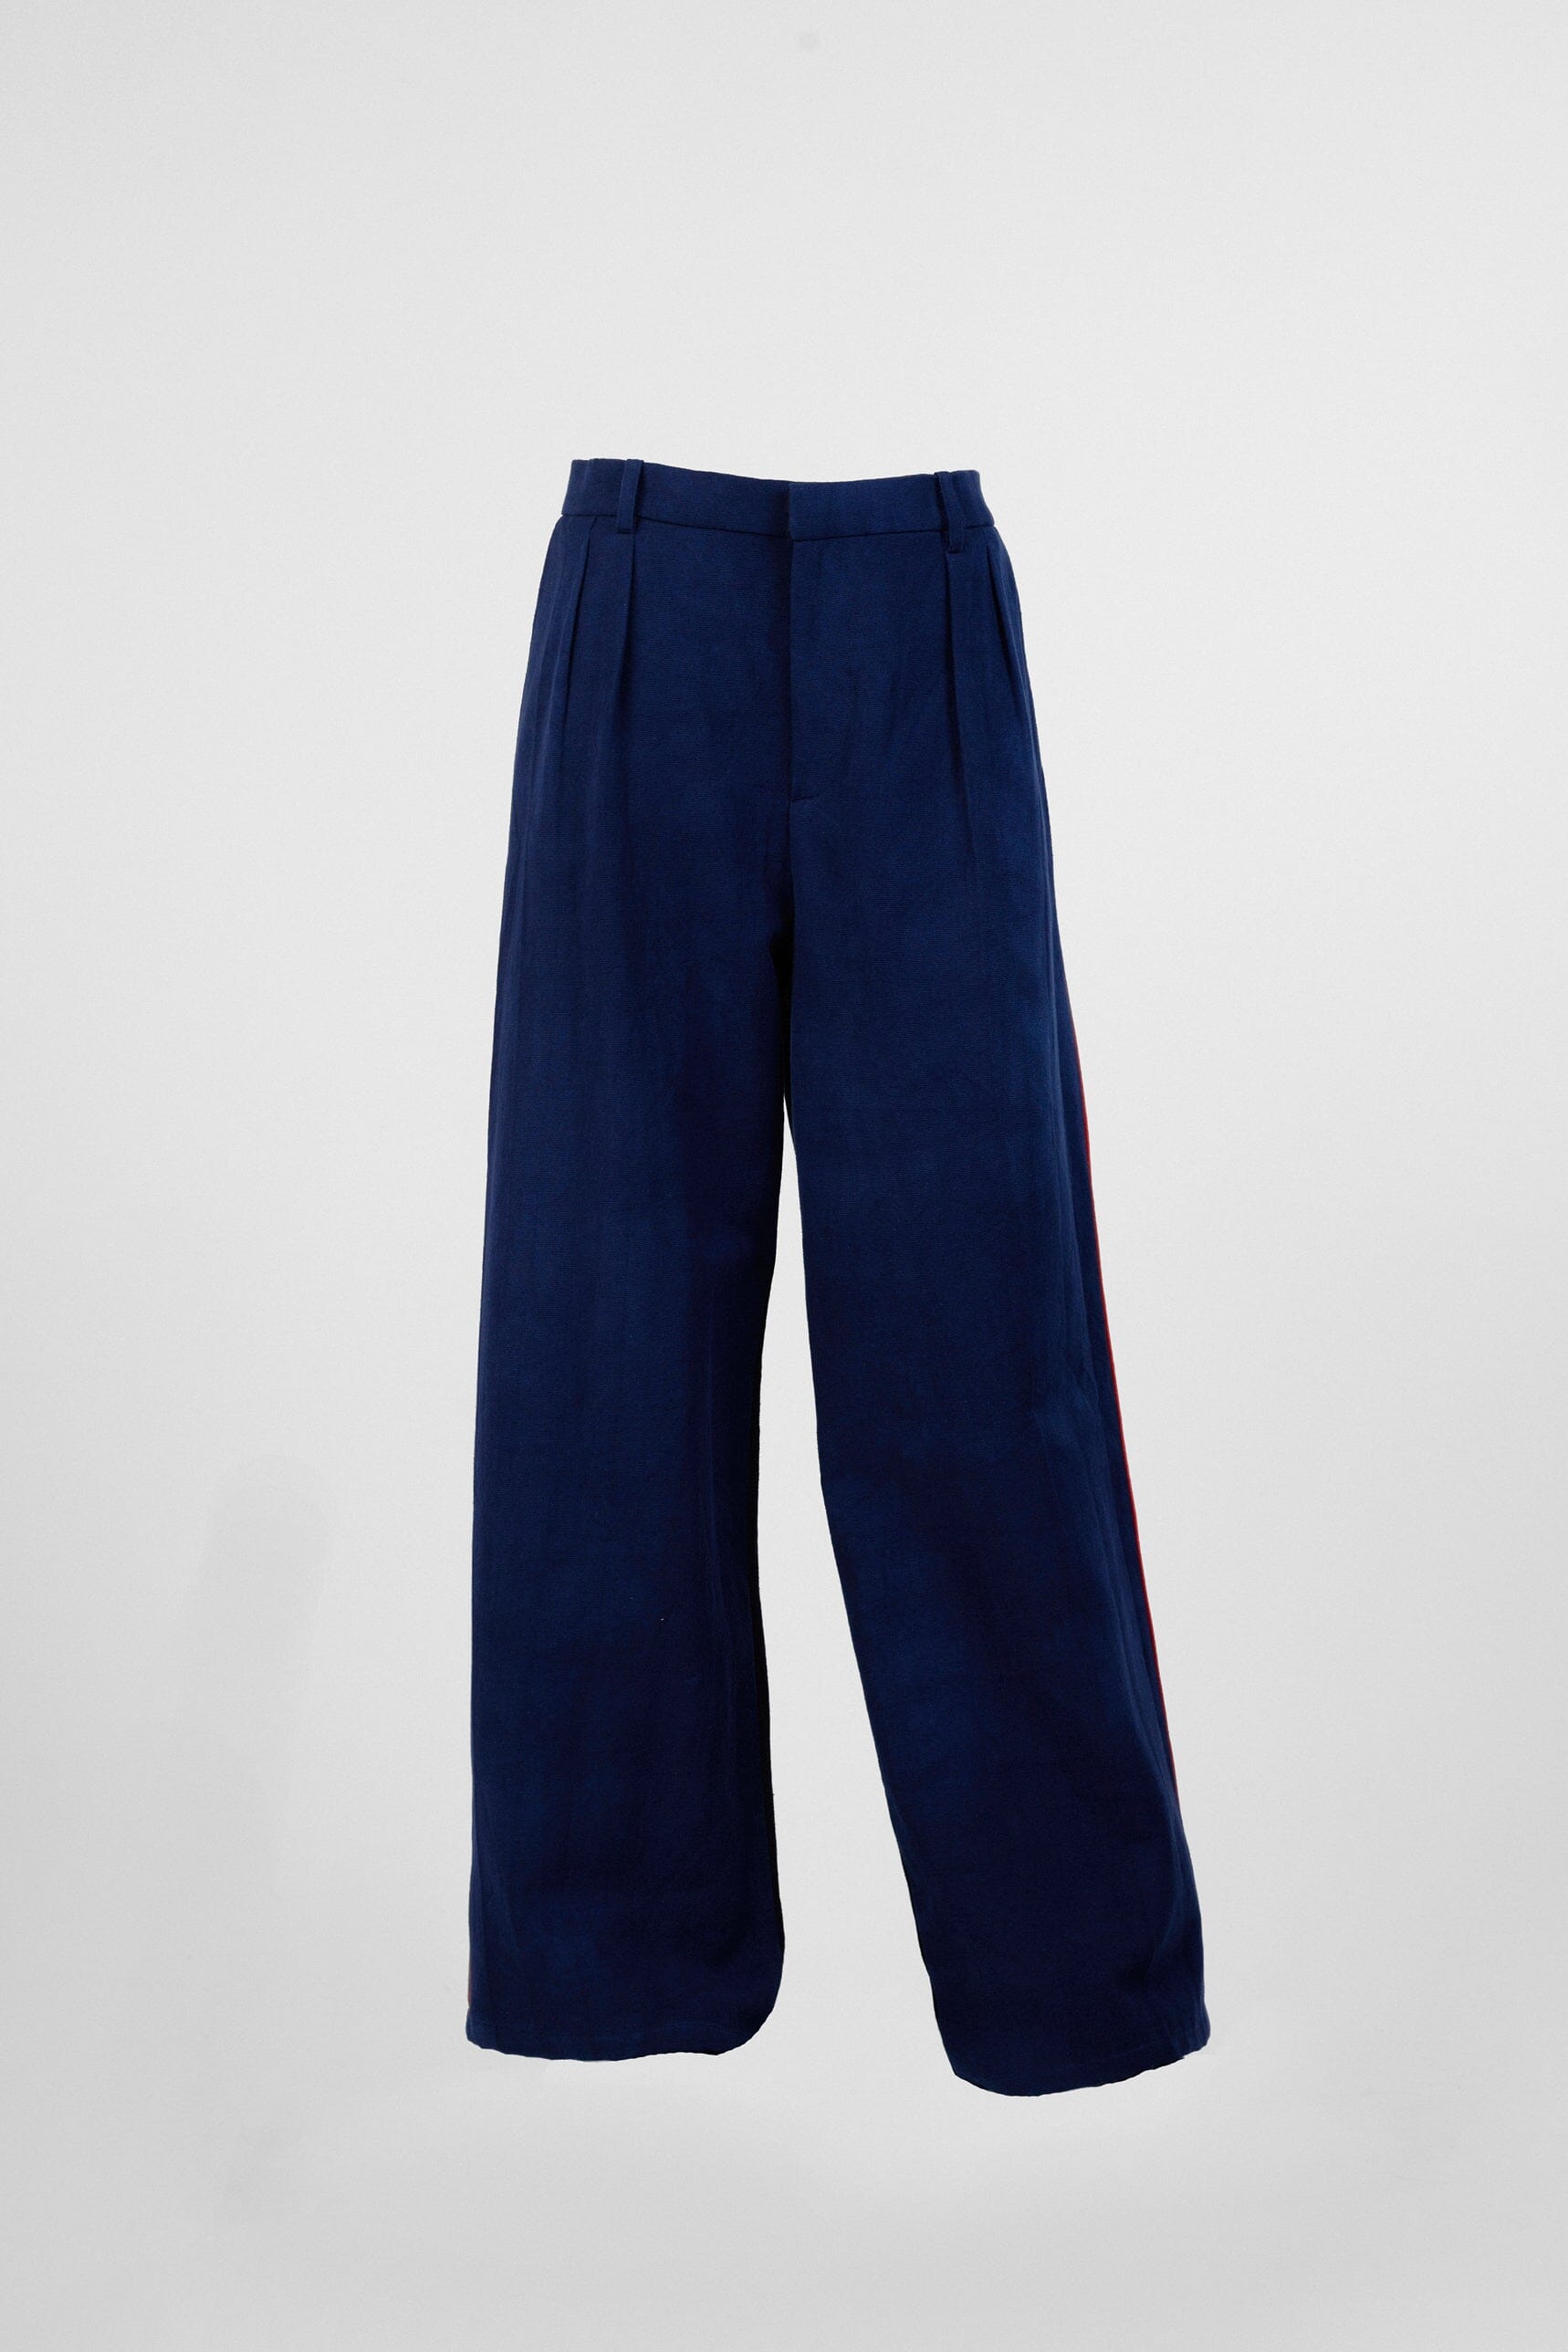 Stripe Seam Classic Wide Pants • Bi-colour Trousers New LaurenceAirline 